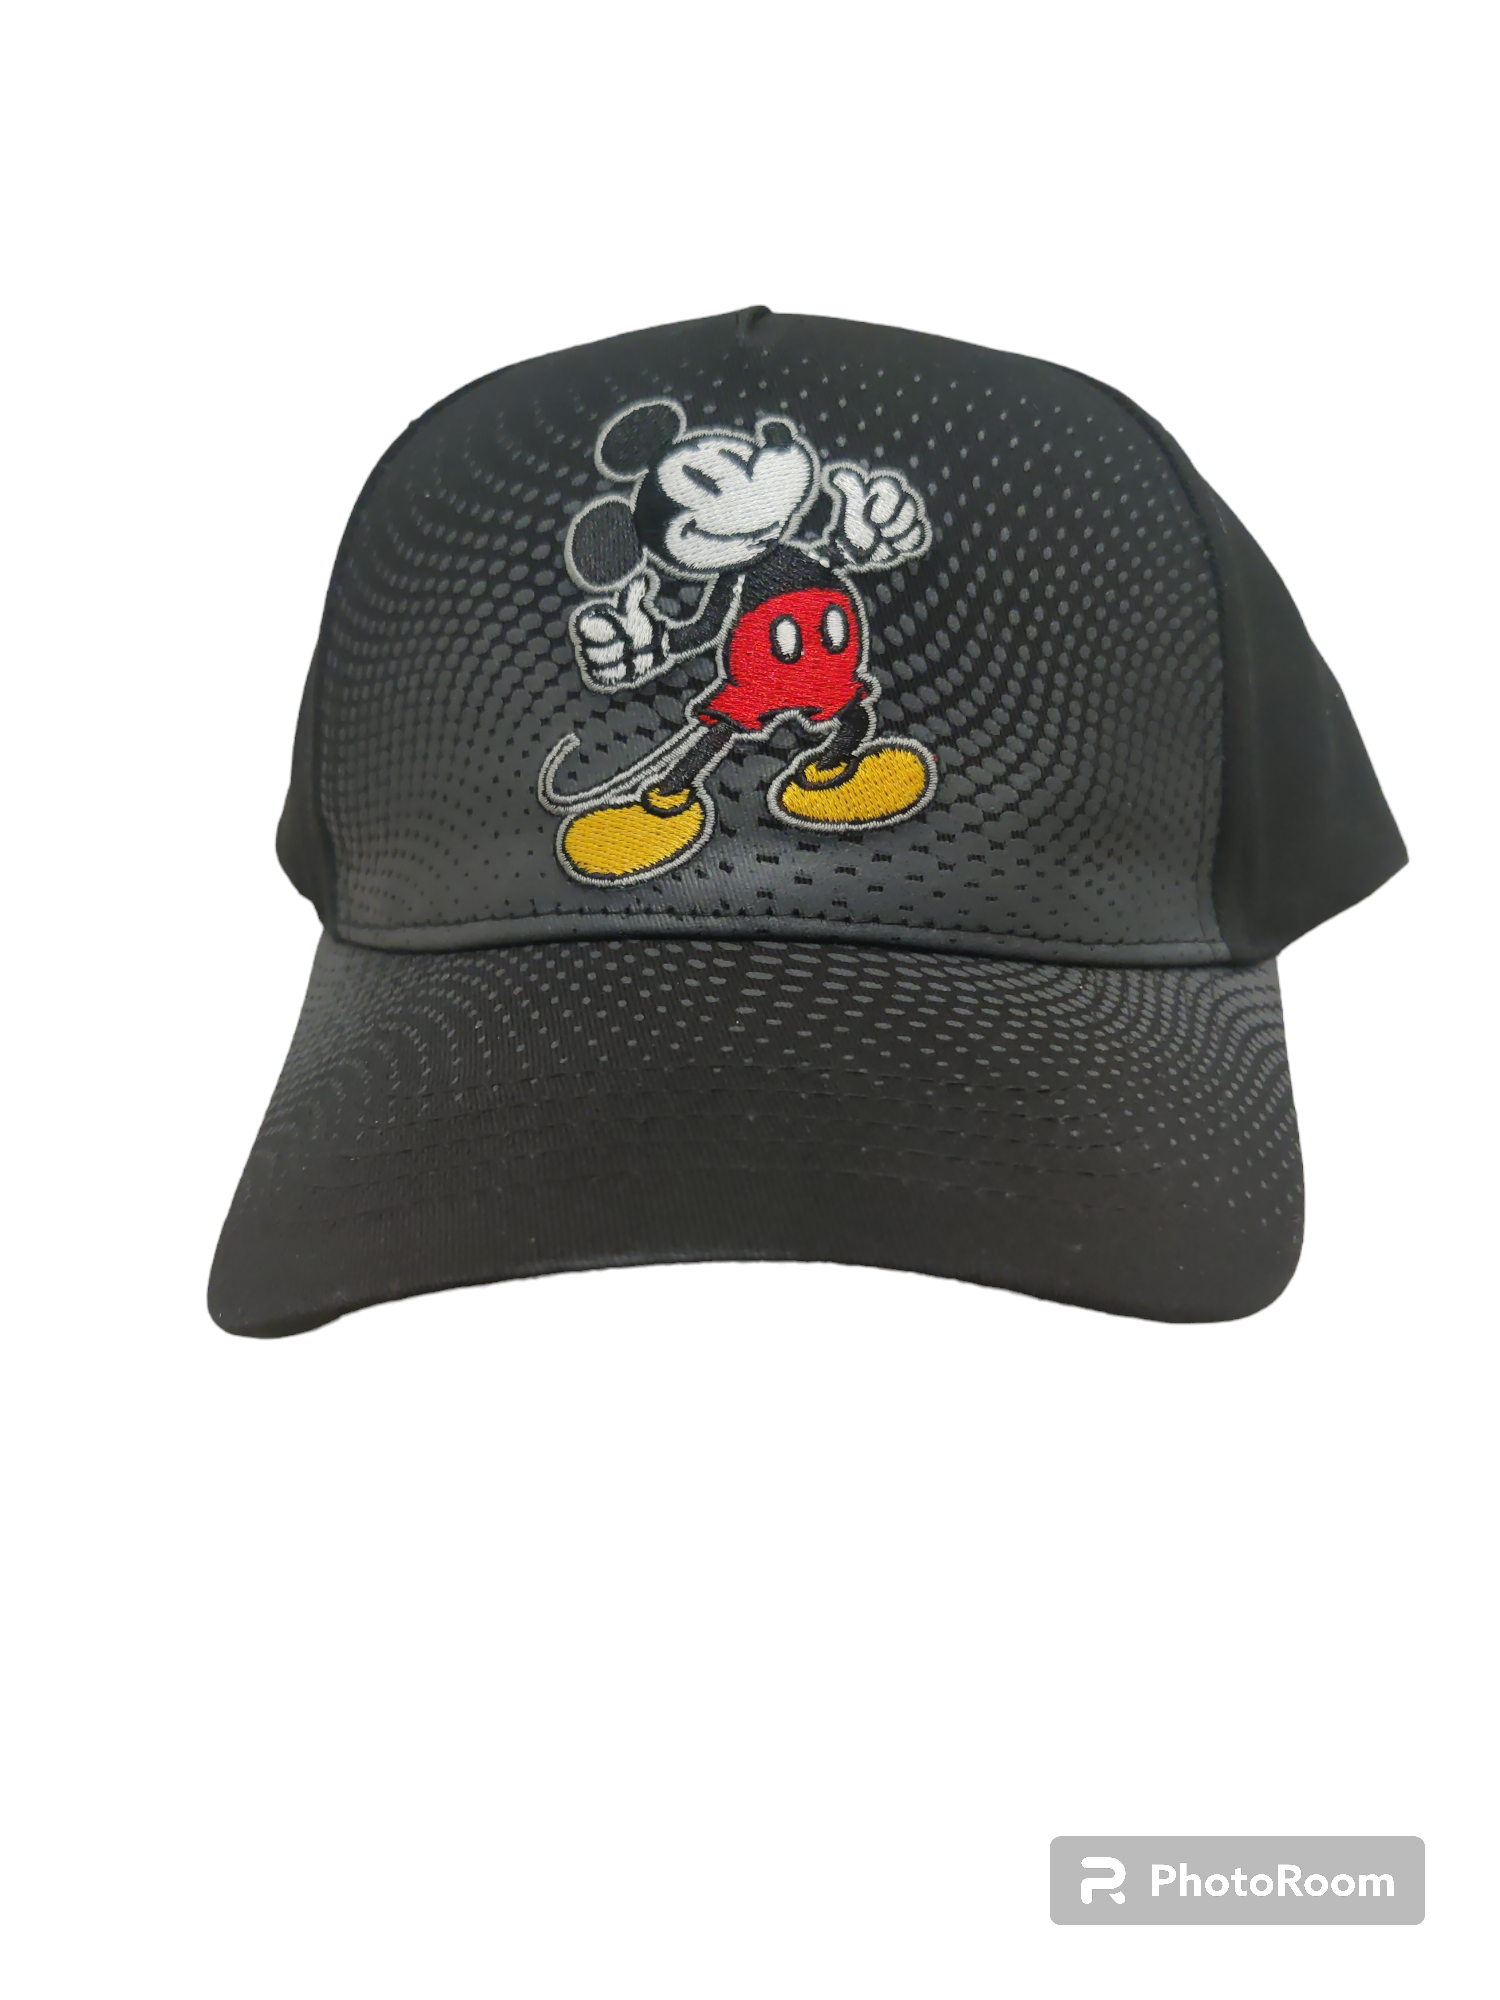 All Cool with Mickey Pose Headwear